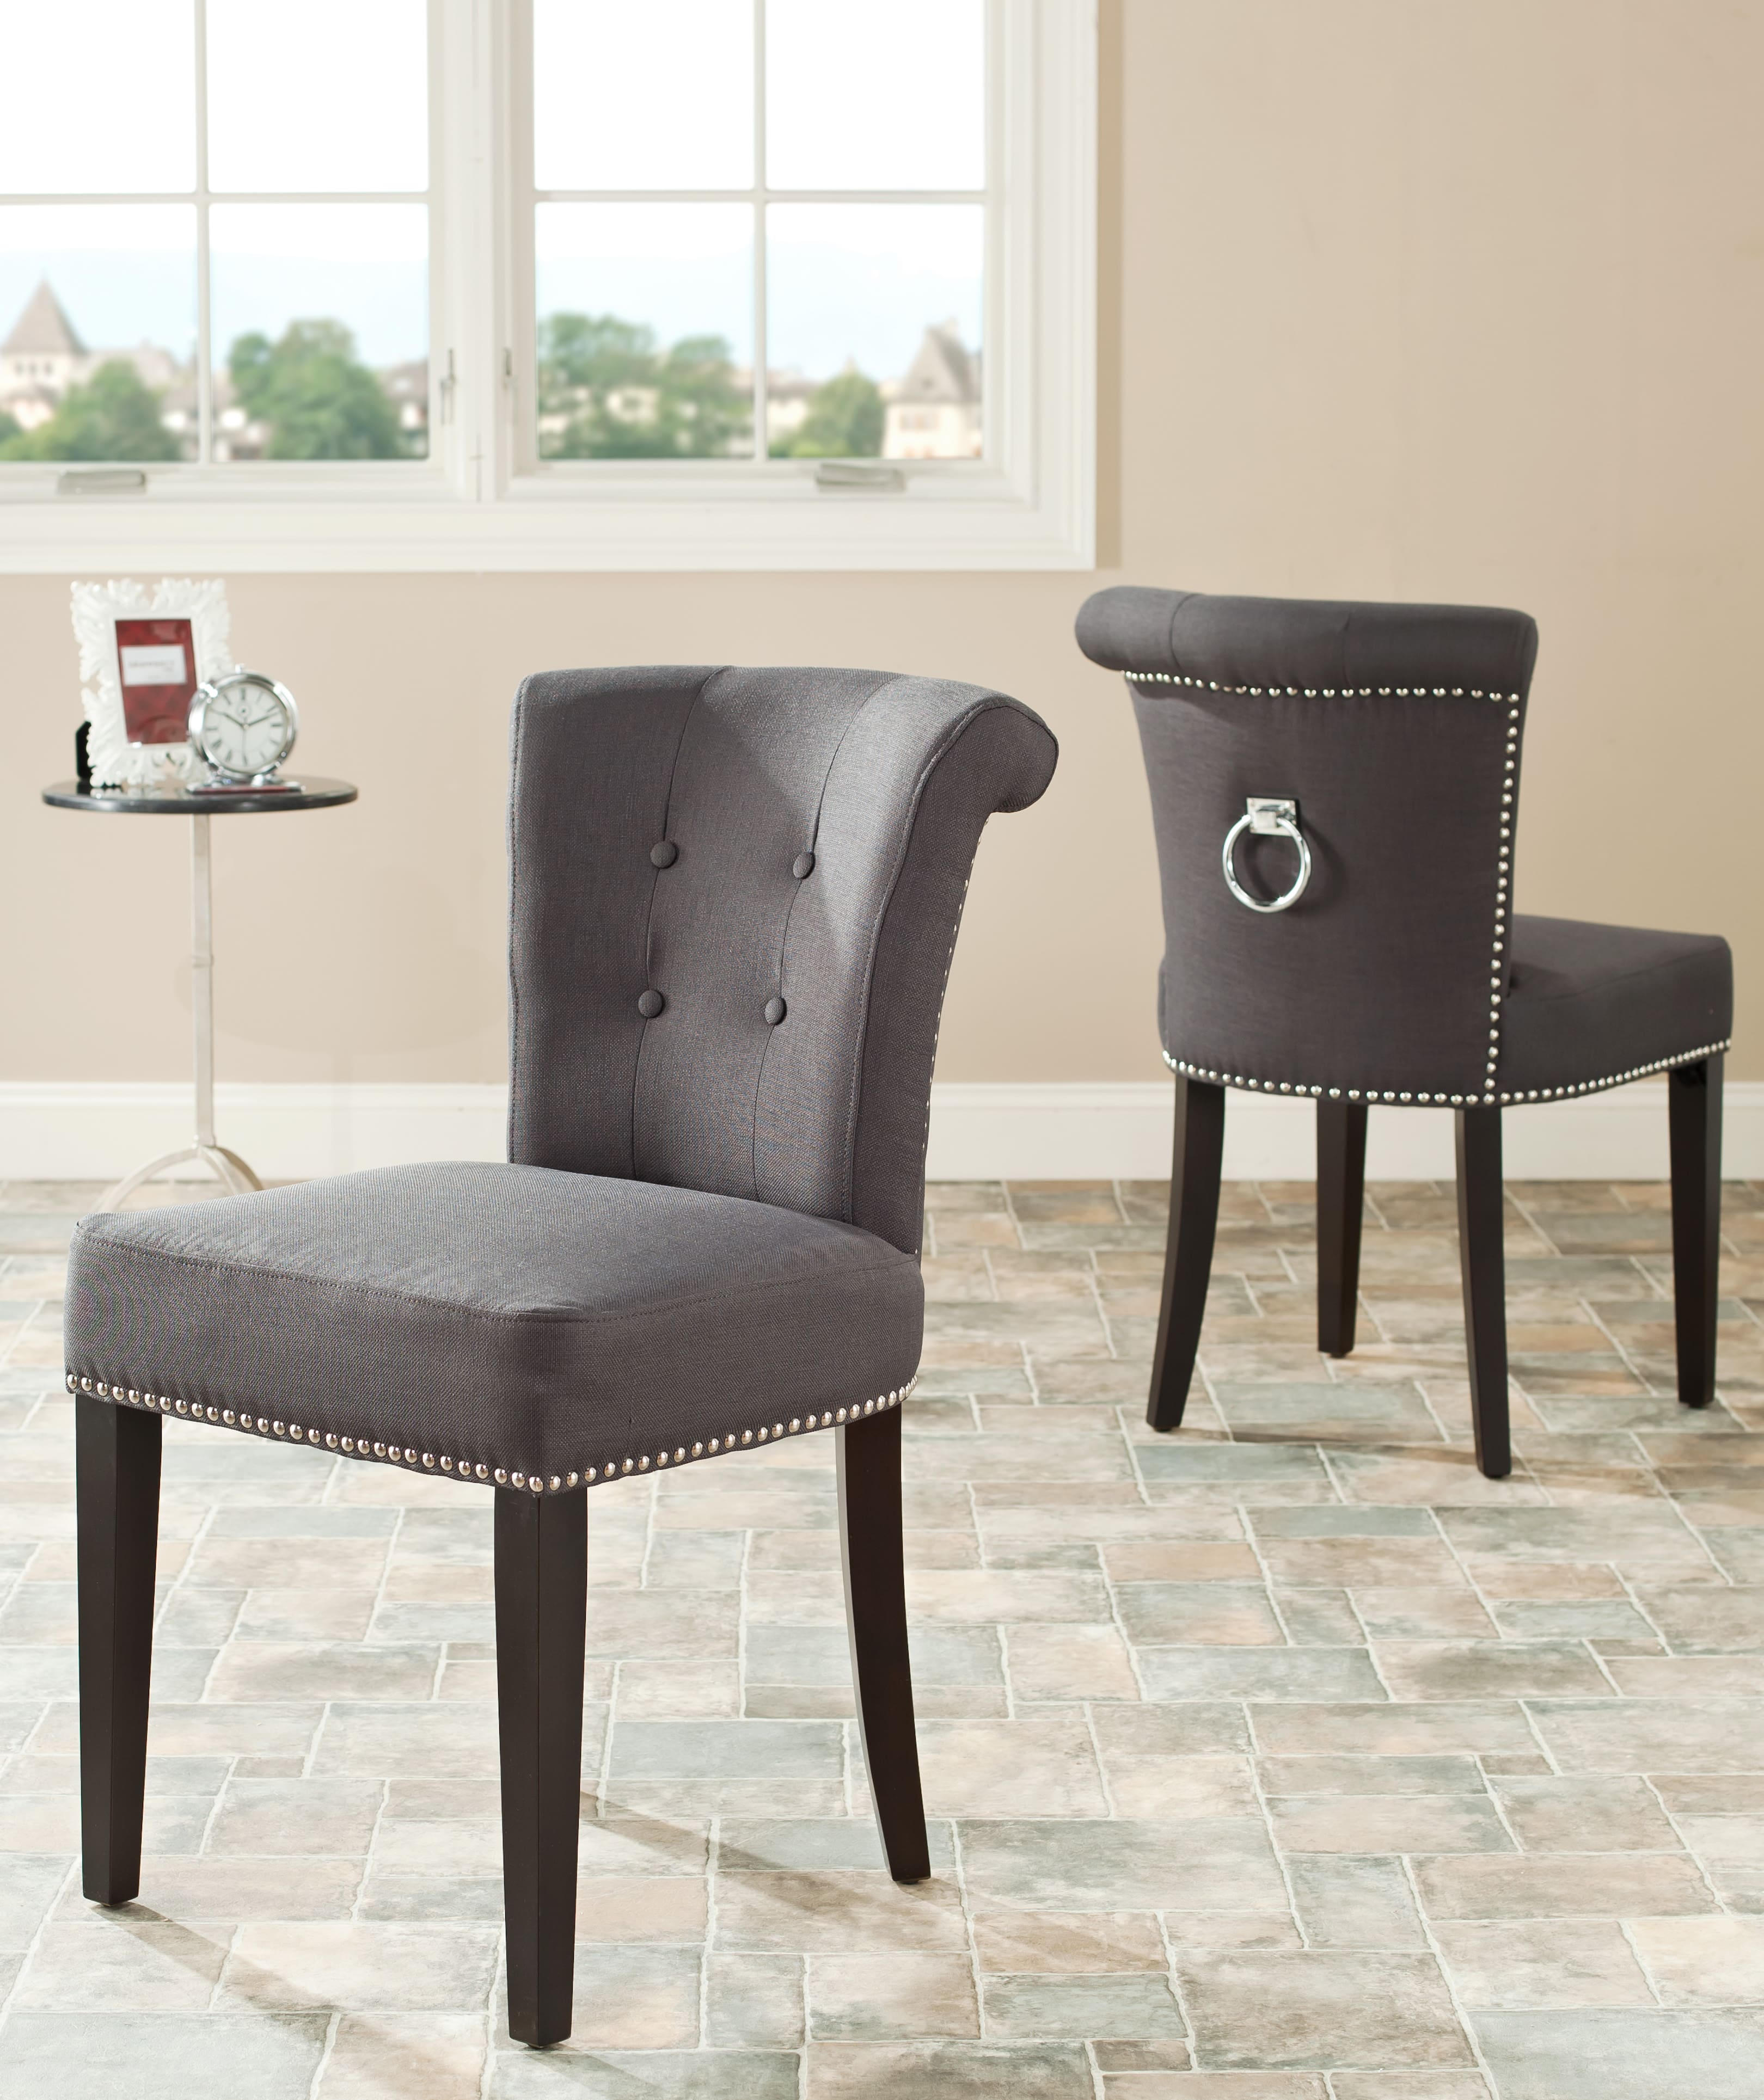 Sinclair Ring Chair Set of 2 in Gray